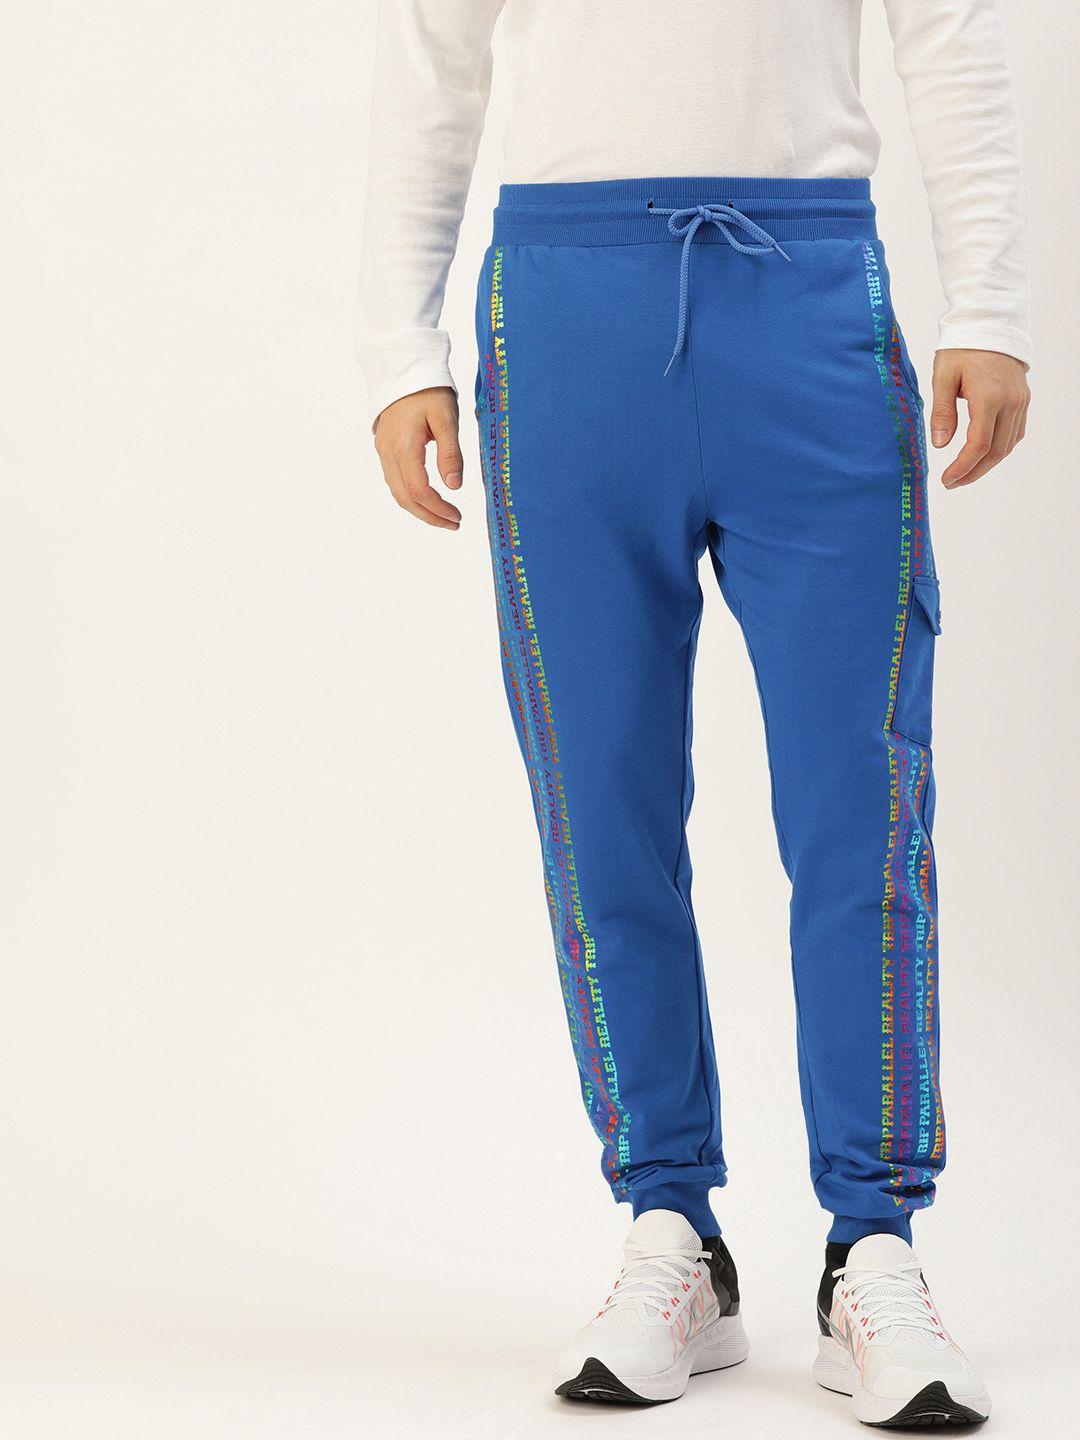 forever-21-men-blue-typography-printed-regular-fit-pure-cotton-joggers-trousers